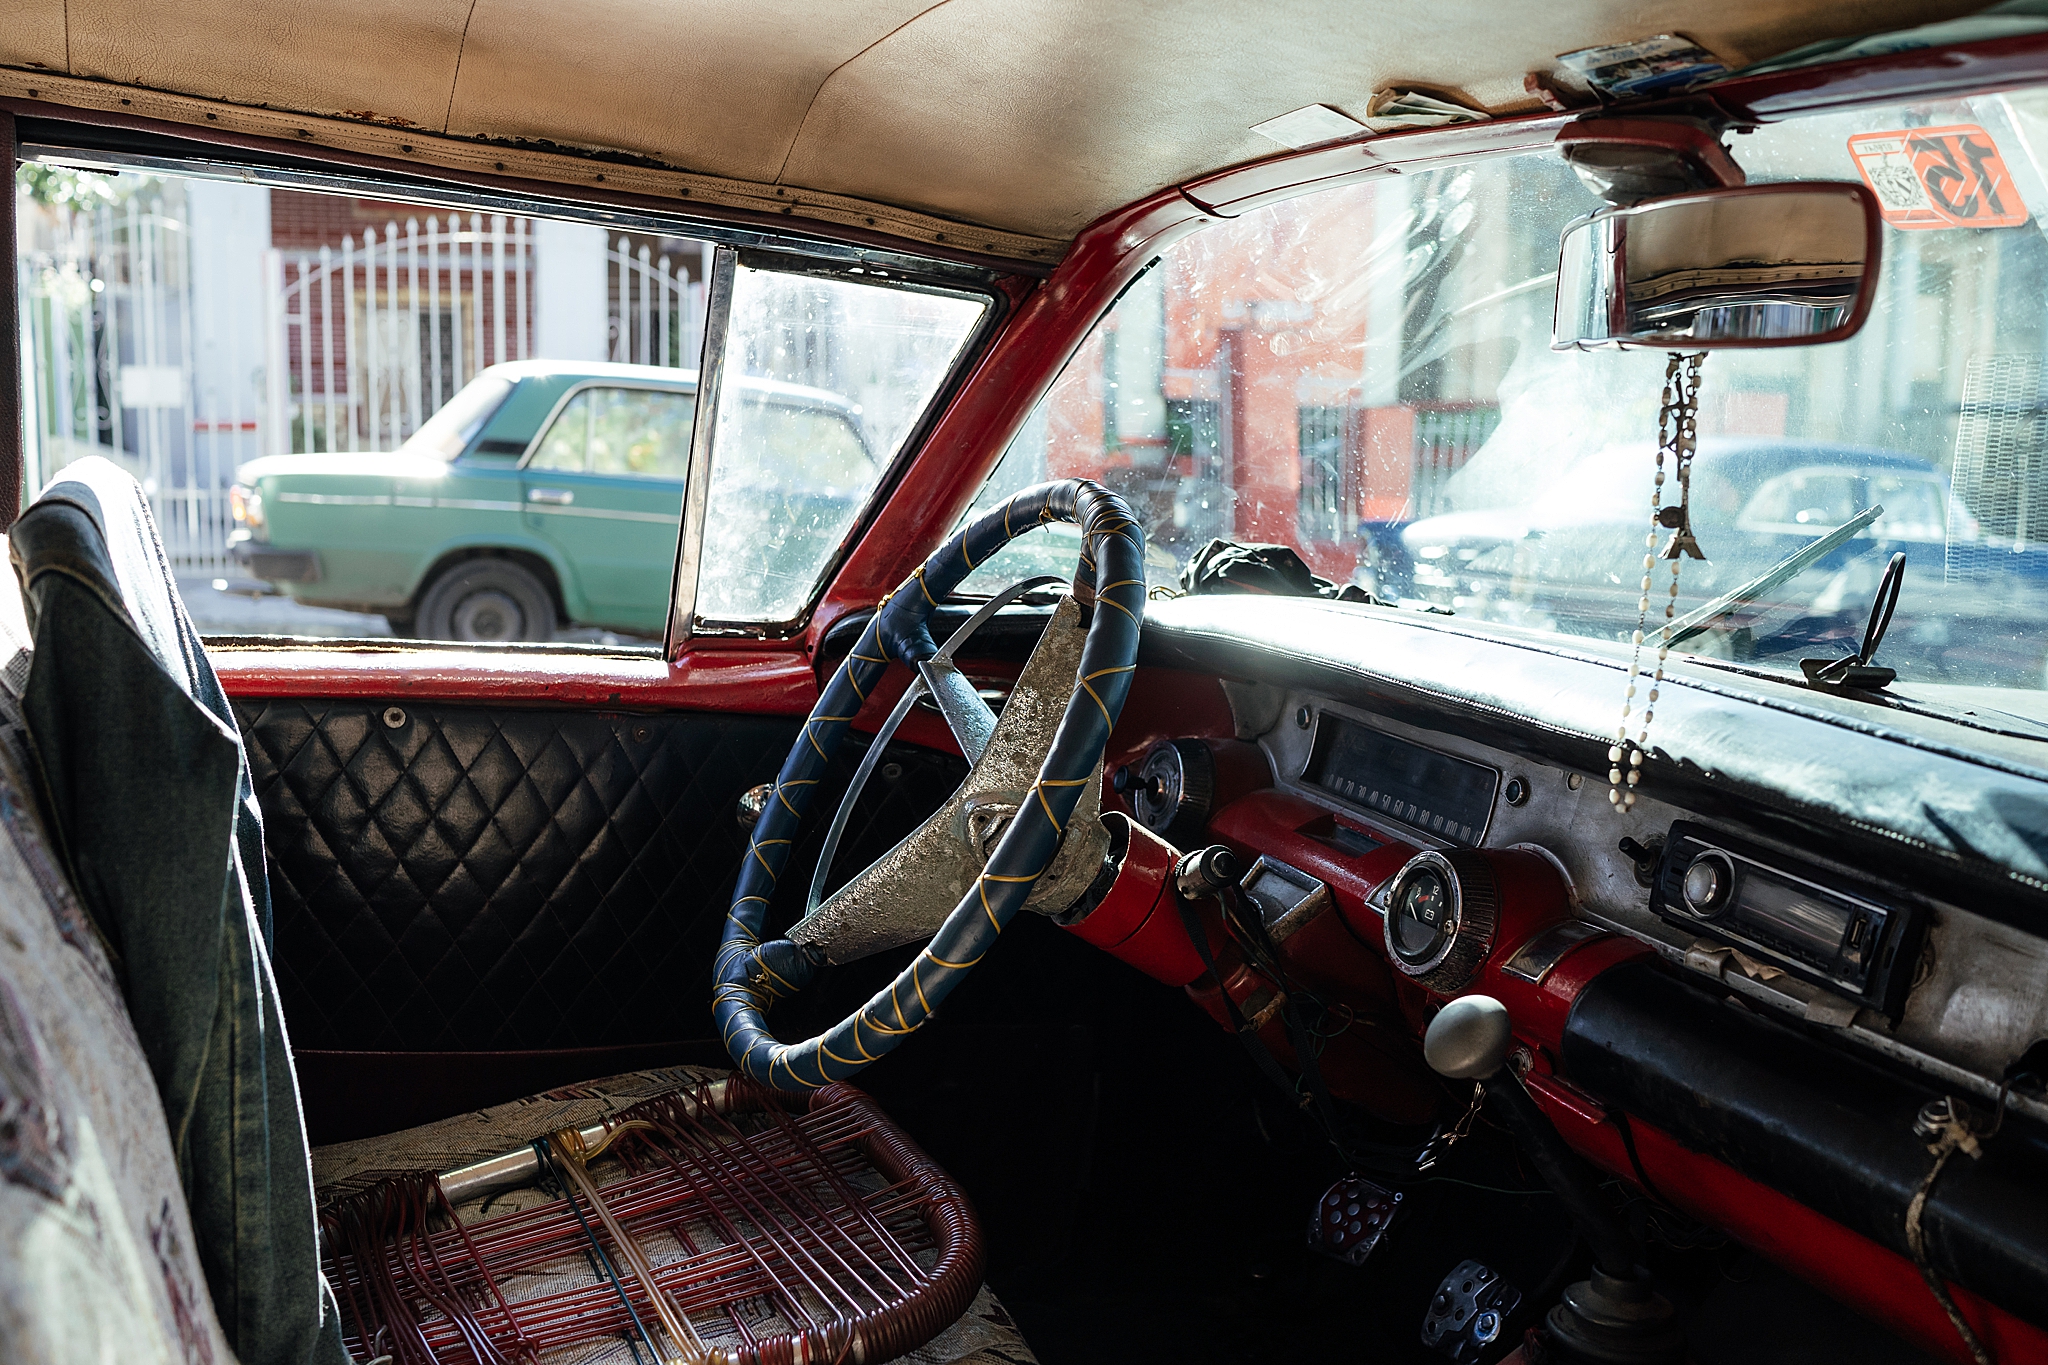  I loved looking into the old cars in Cuba to see how the maintain them. Here a dilapidated lawn-chair is an upgrade to the decaying upholstery.  